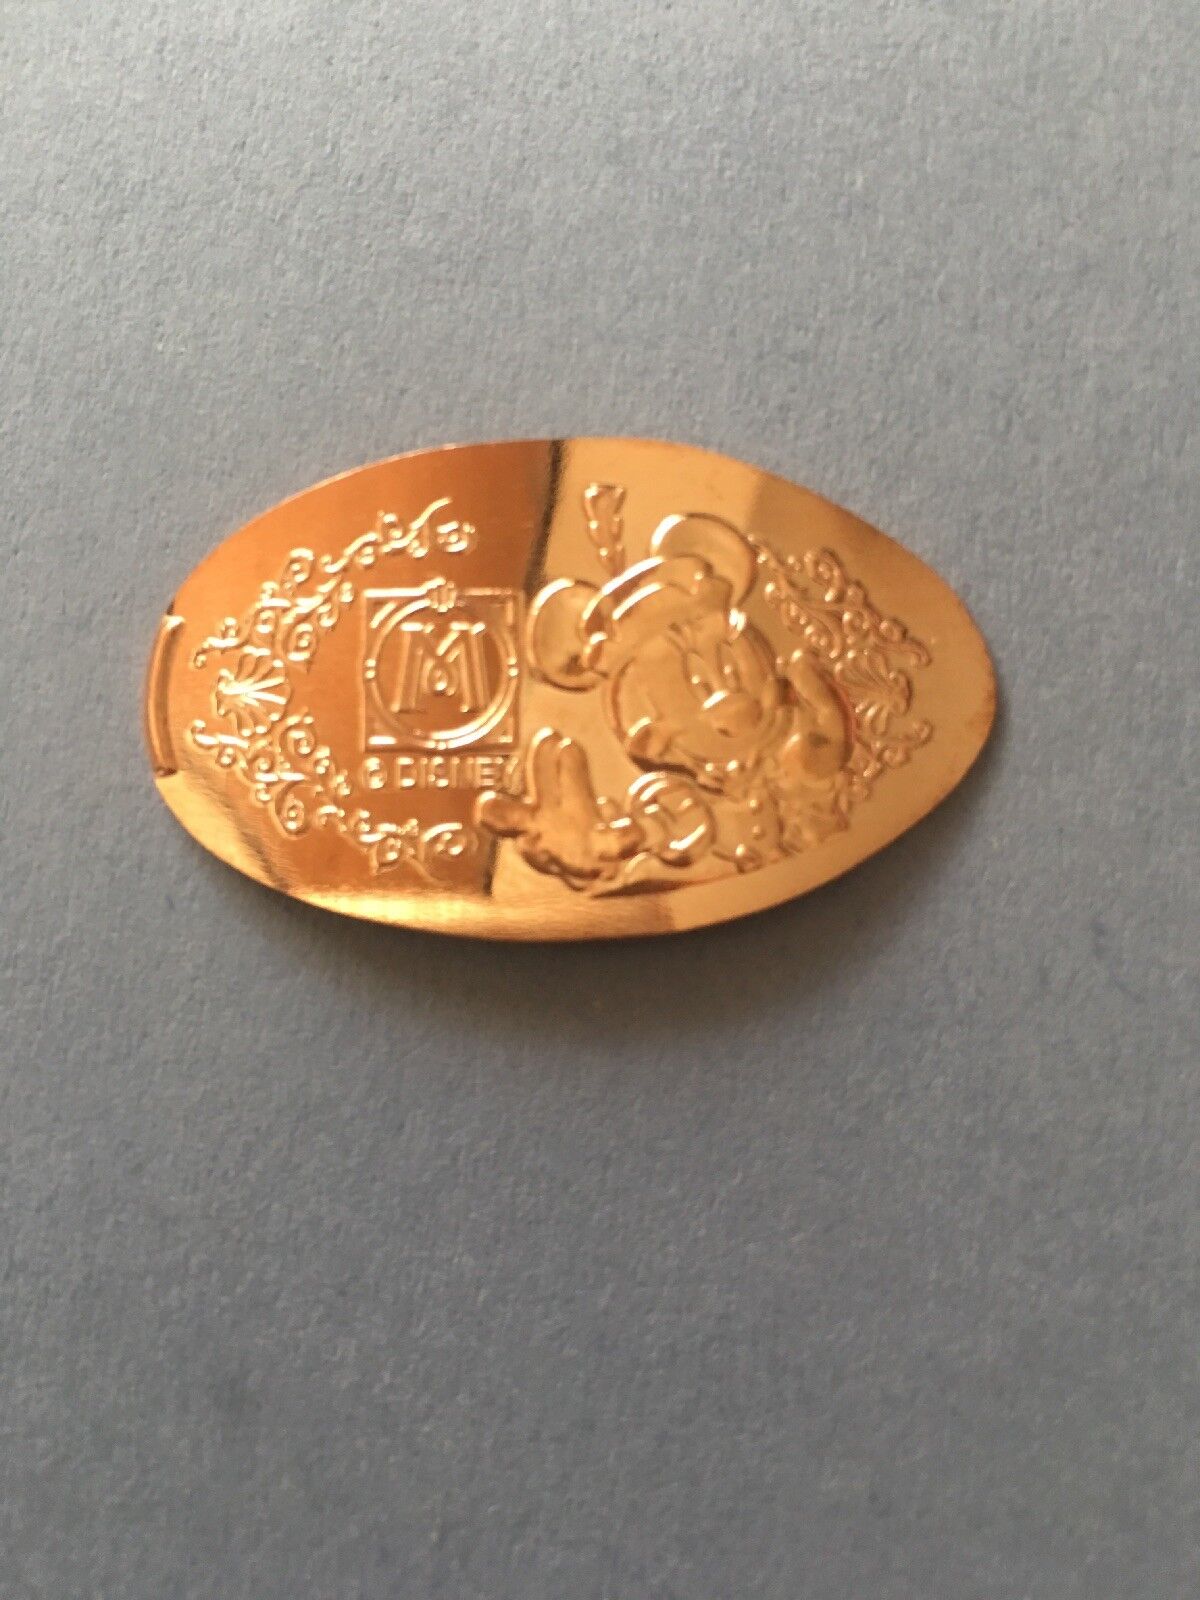 MINNIE MOUSE Tokyo Disney Sea Elongated Pressed Medal Mira Costa Hotel Penny